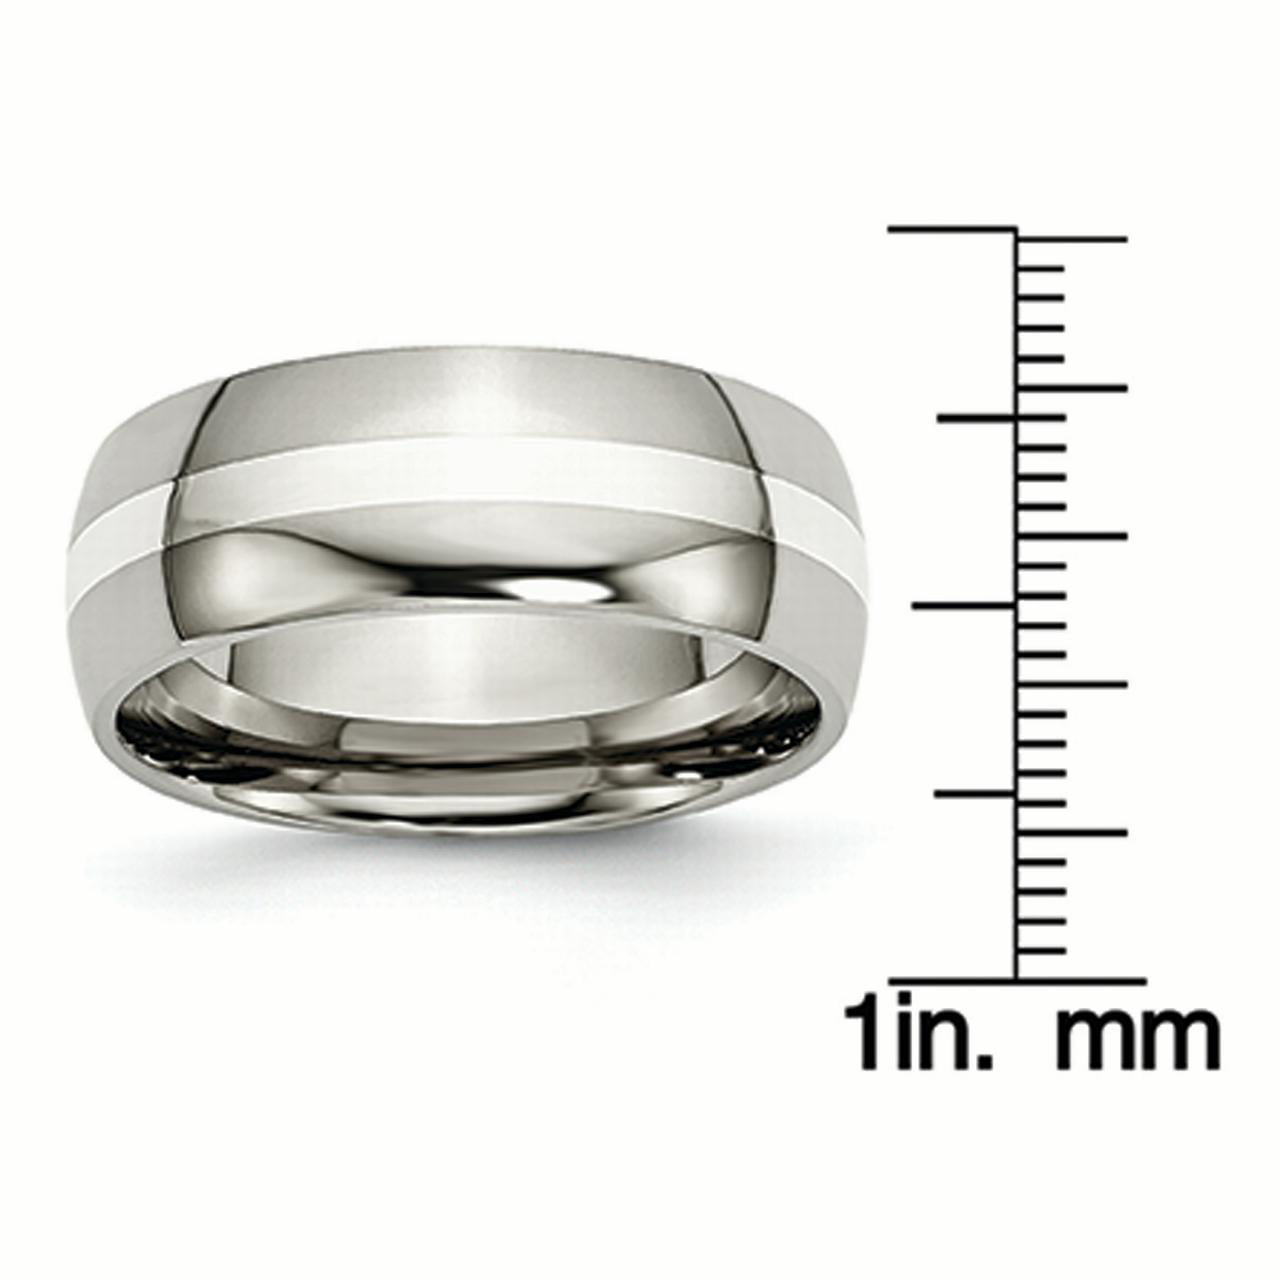 Best Quality Free Gift Box Titanium Sterling Silver Inlay 8mm Brushed Band 